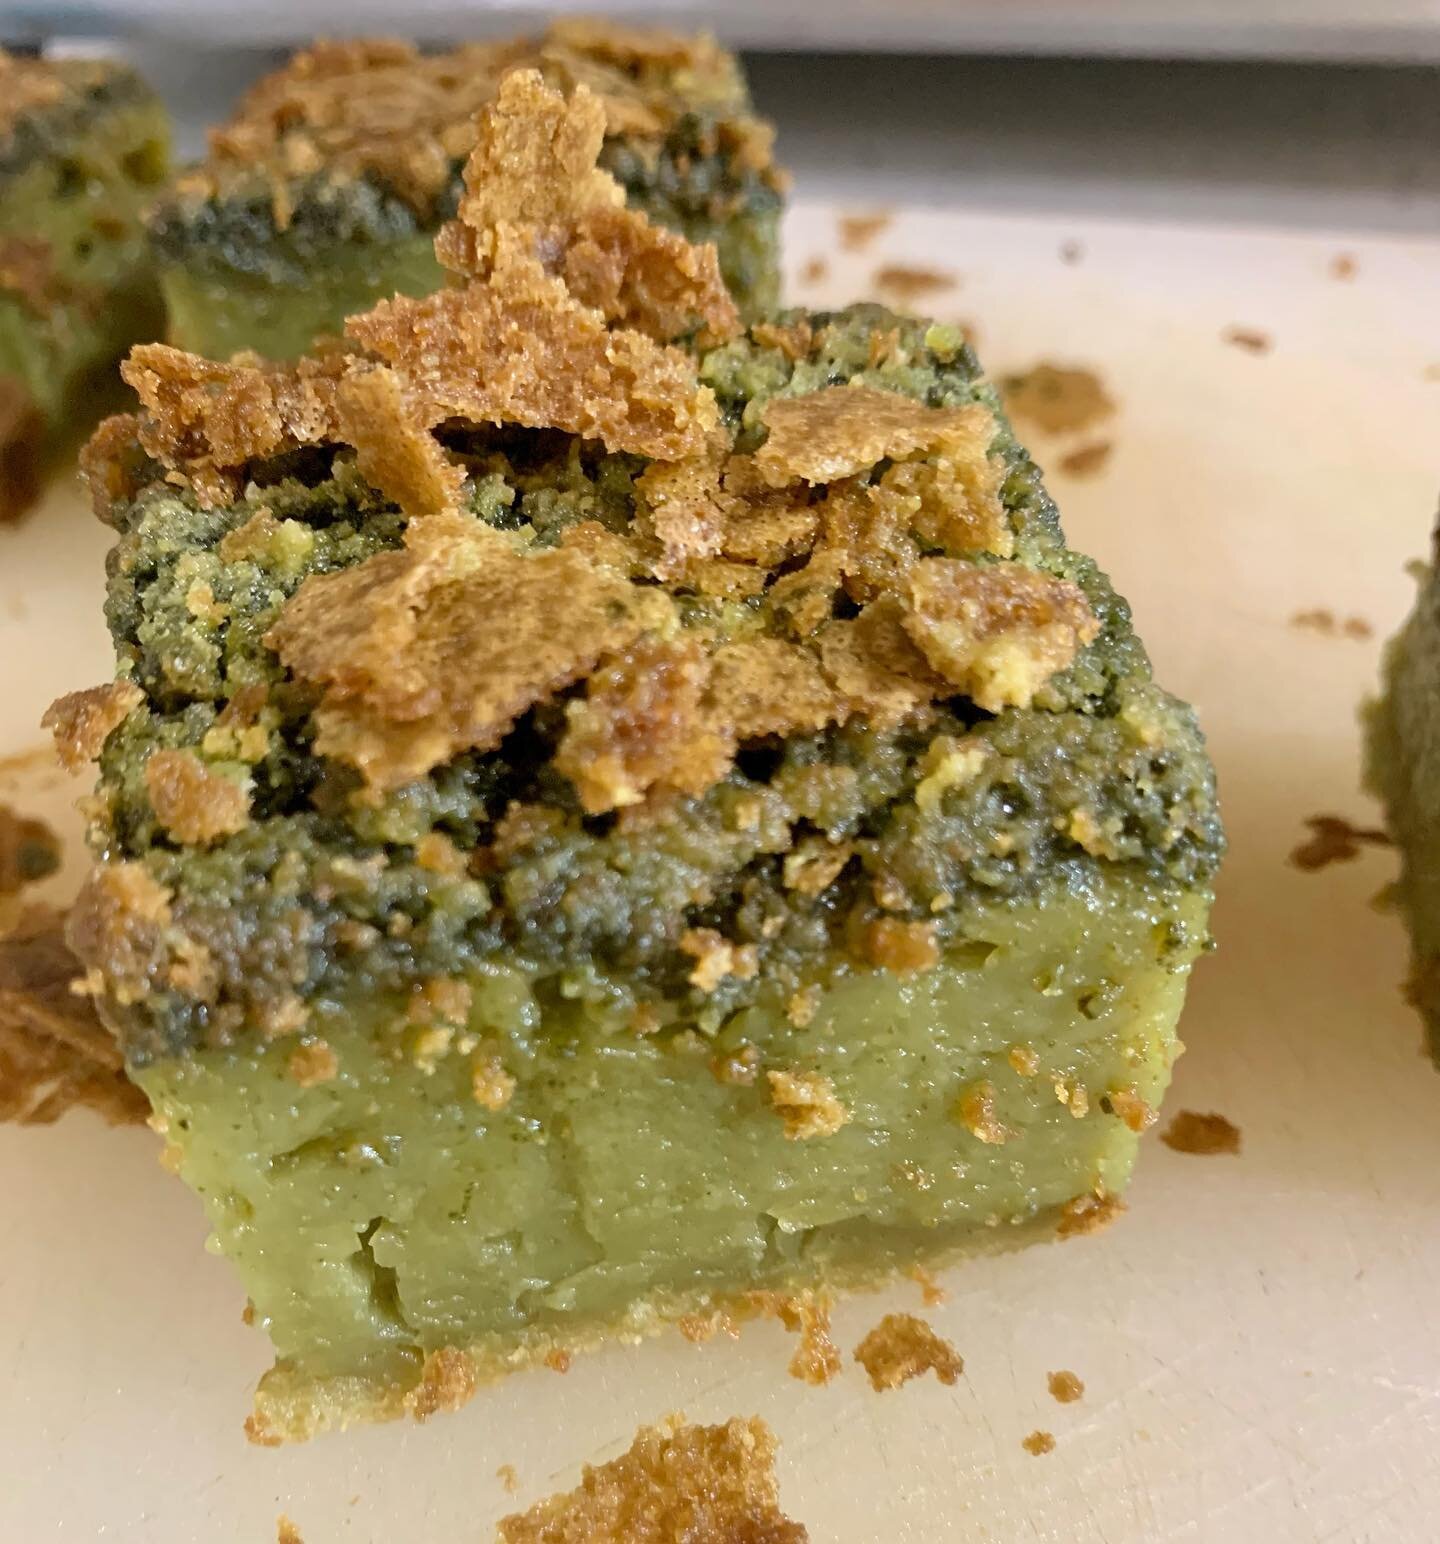 if you were able to snag a matcha butter mochi at one of my pop ups, how are we feeling about having them on my permanent menu??? 

#matcha #buttermochi #cookies #greentea #brownies #brookie #supportsmallbusiness #homebakery #blueprint #hawaii #local